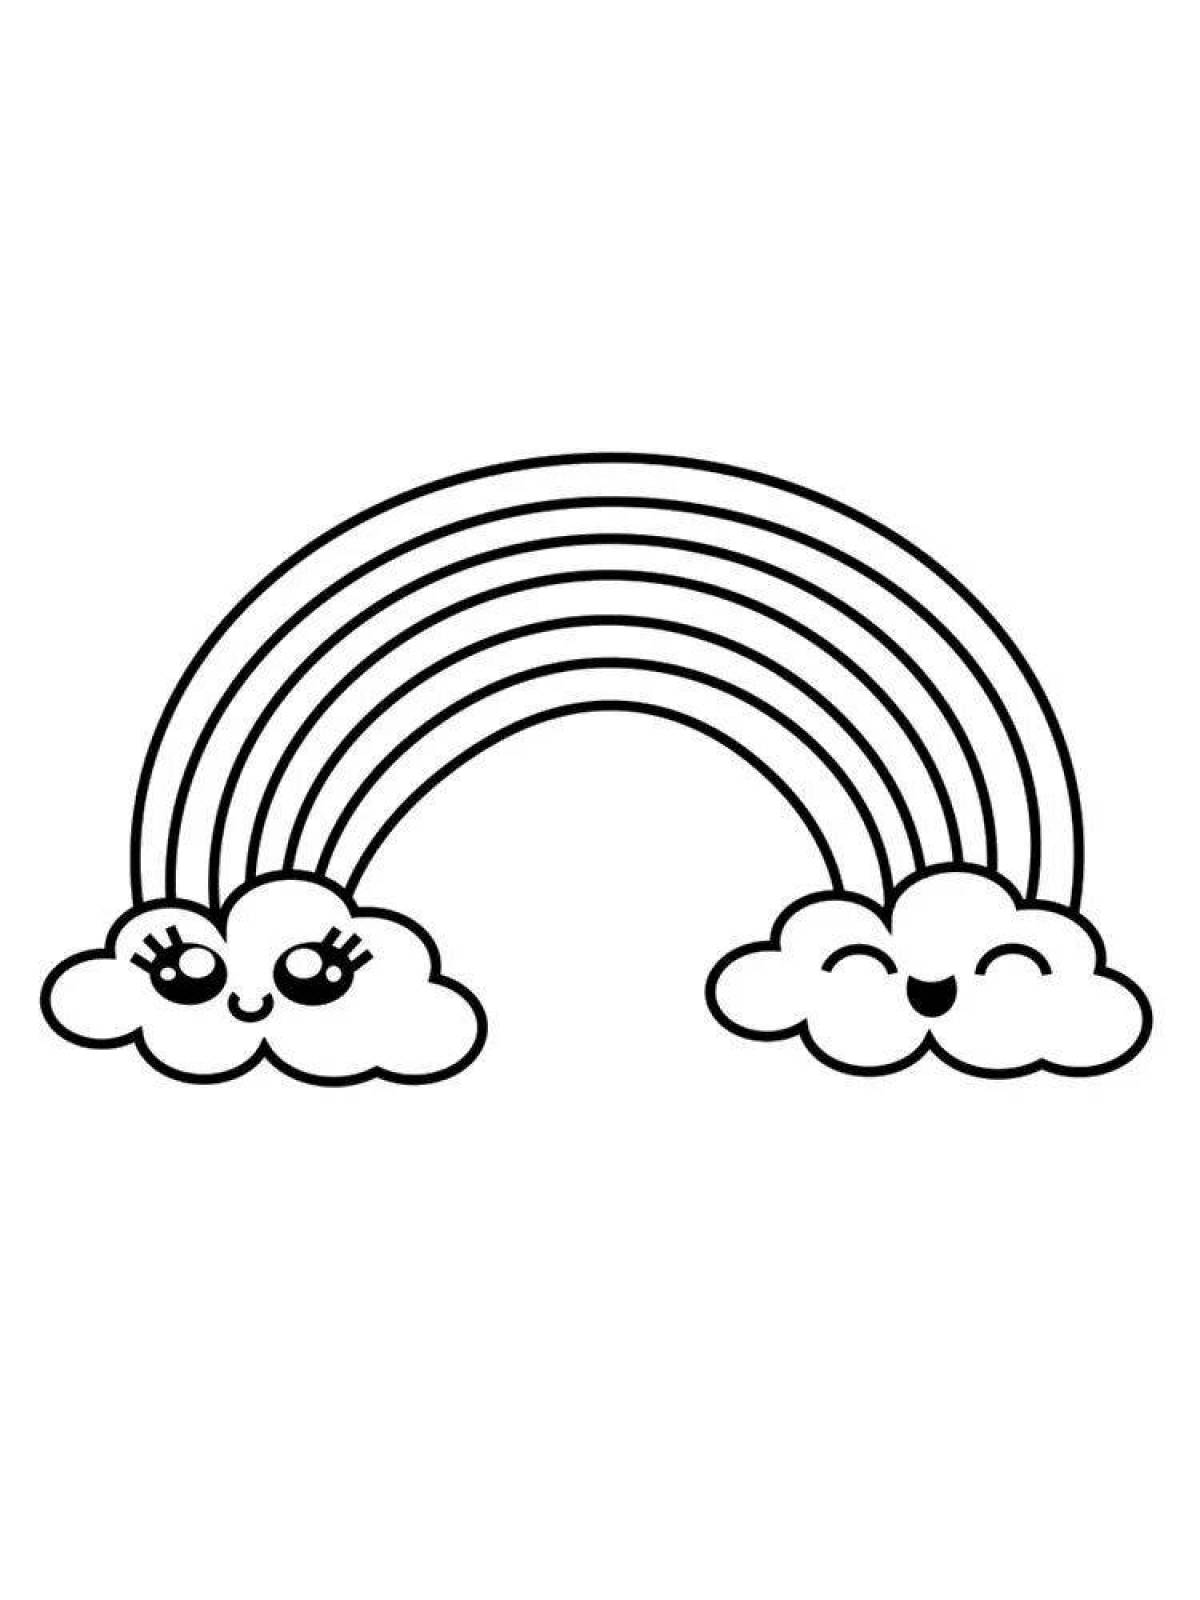 Blissfully coloring page rainbow with clouds